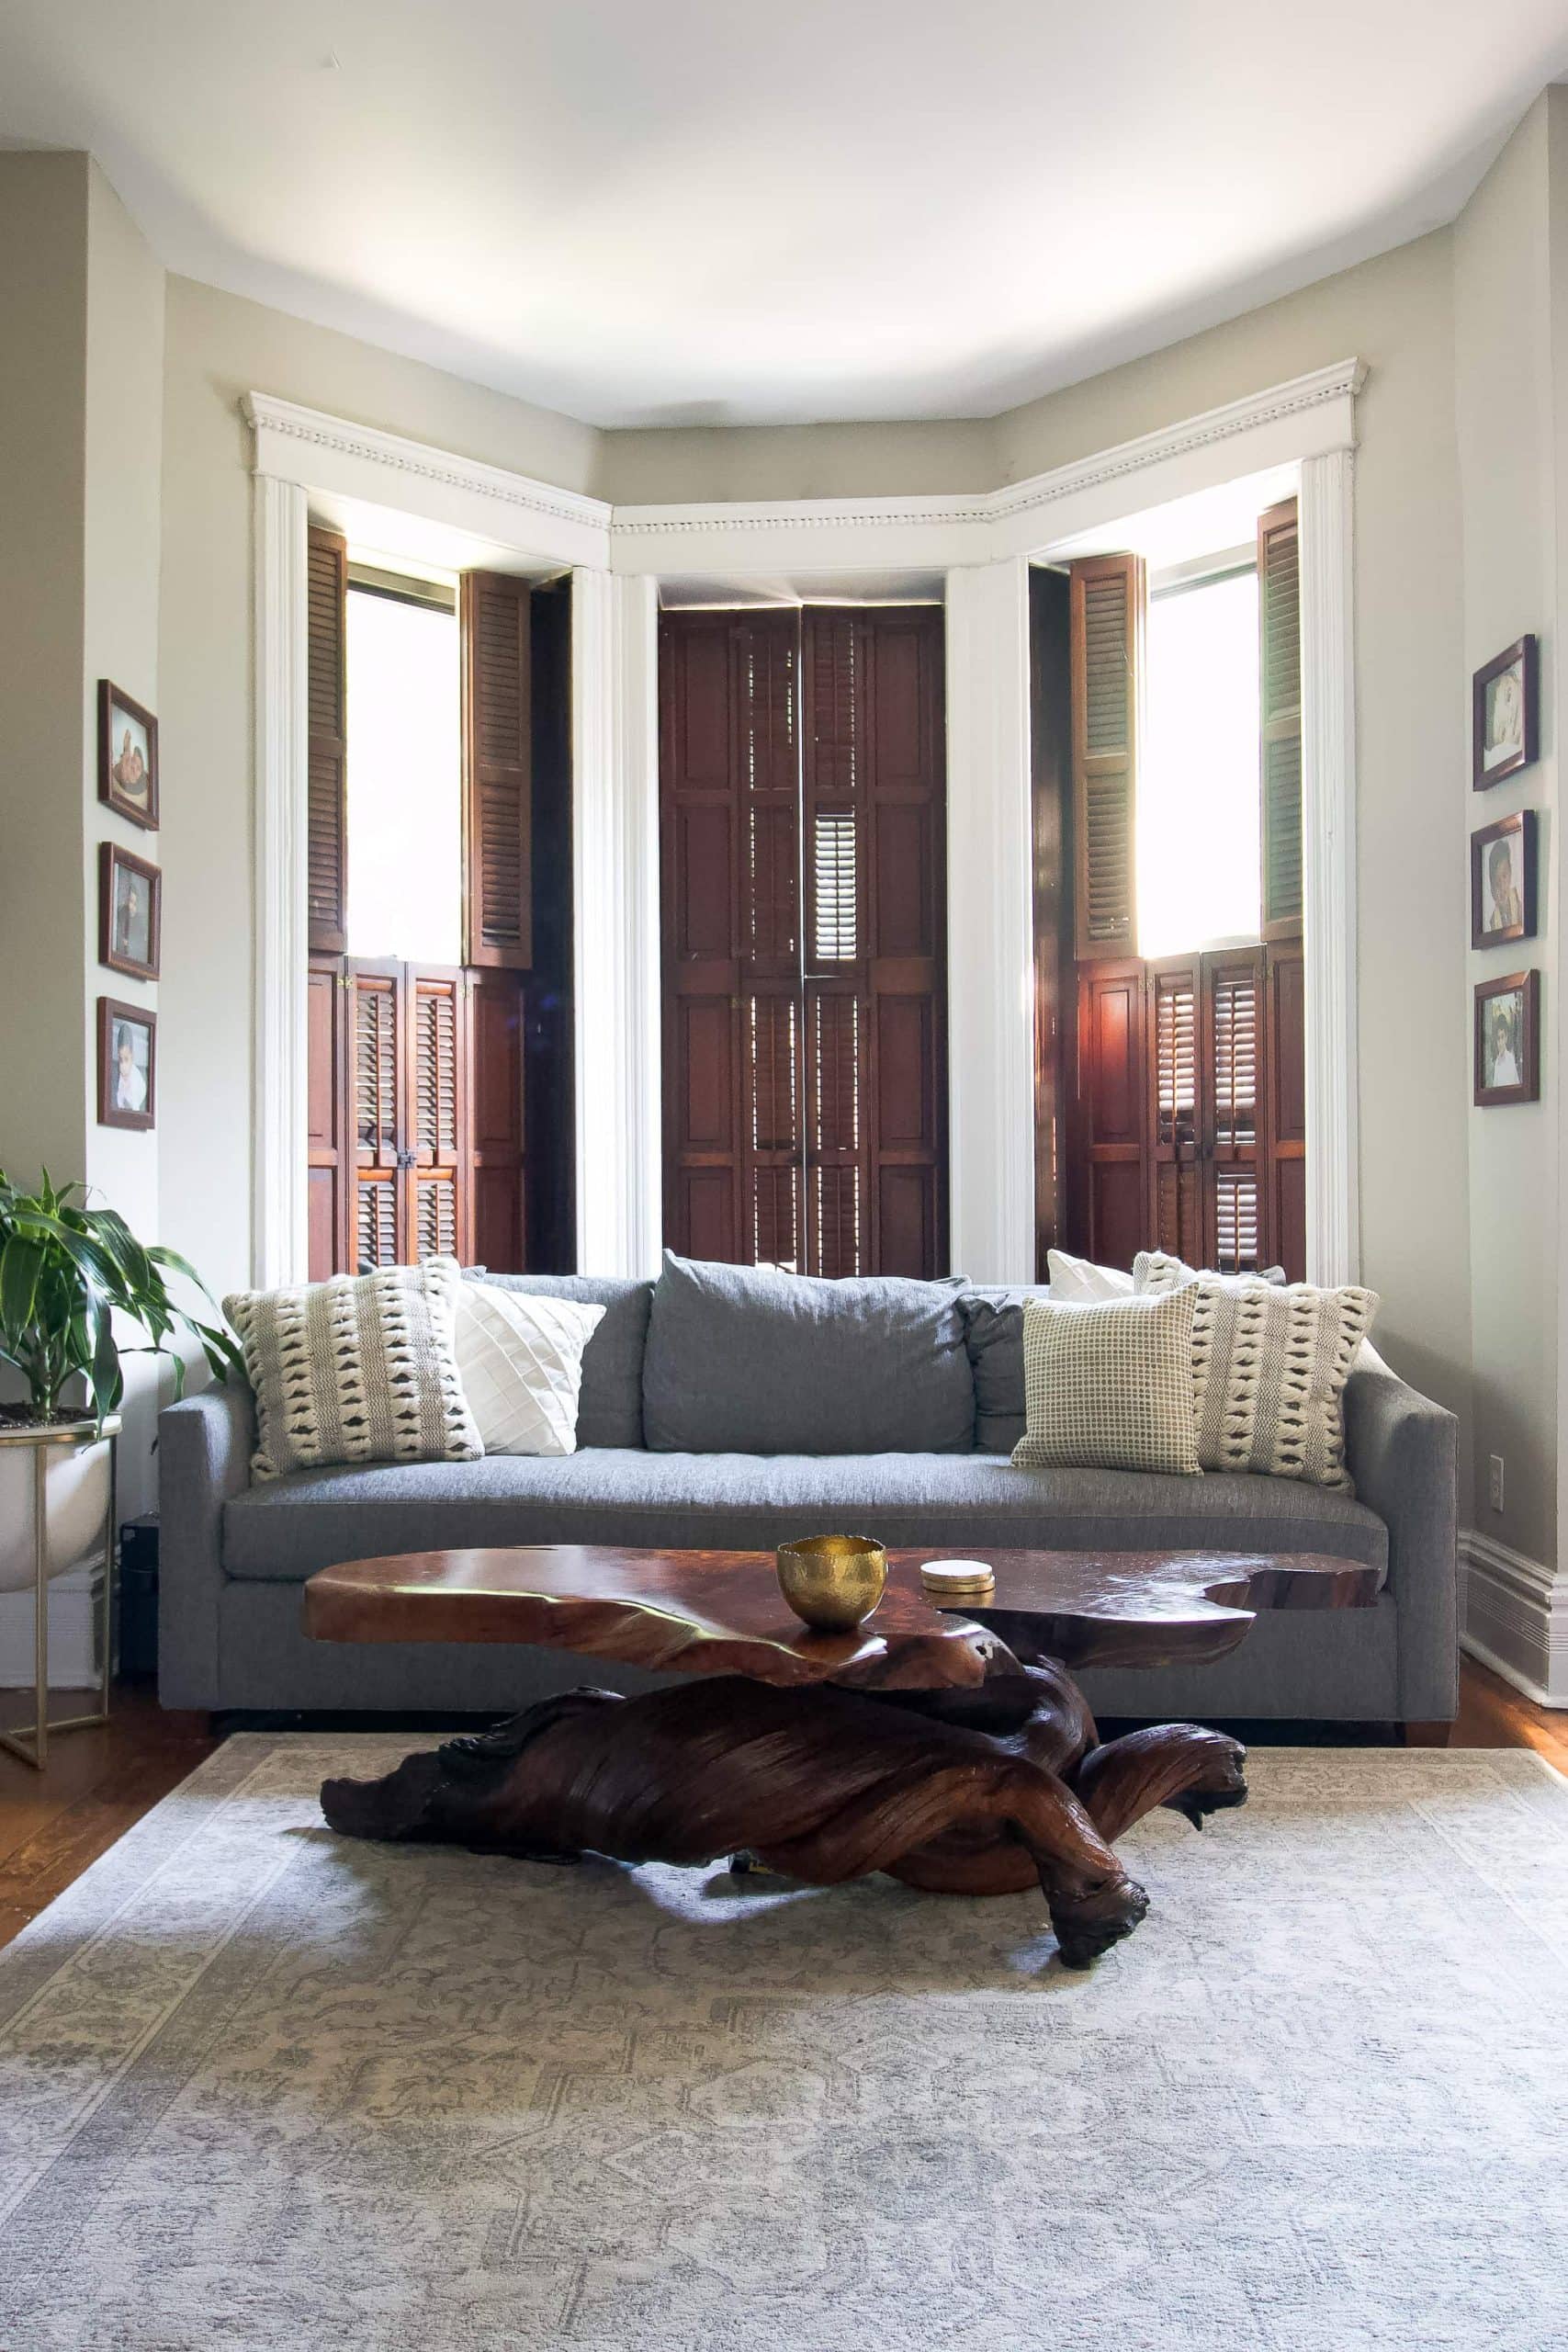 Preserving the millwork and shutters from a historic Chicago home